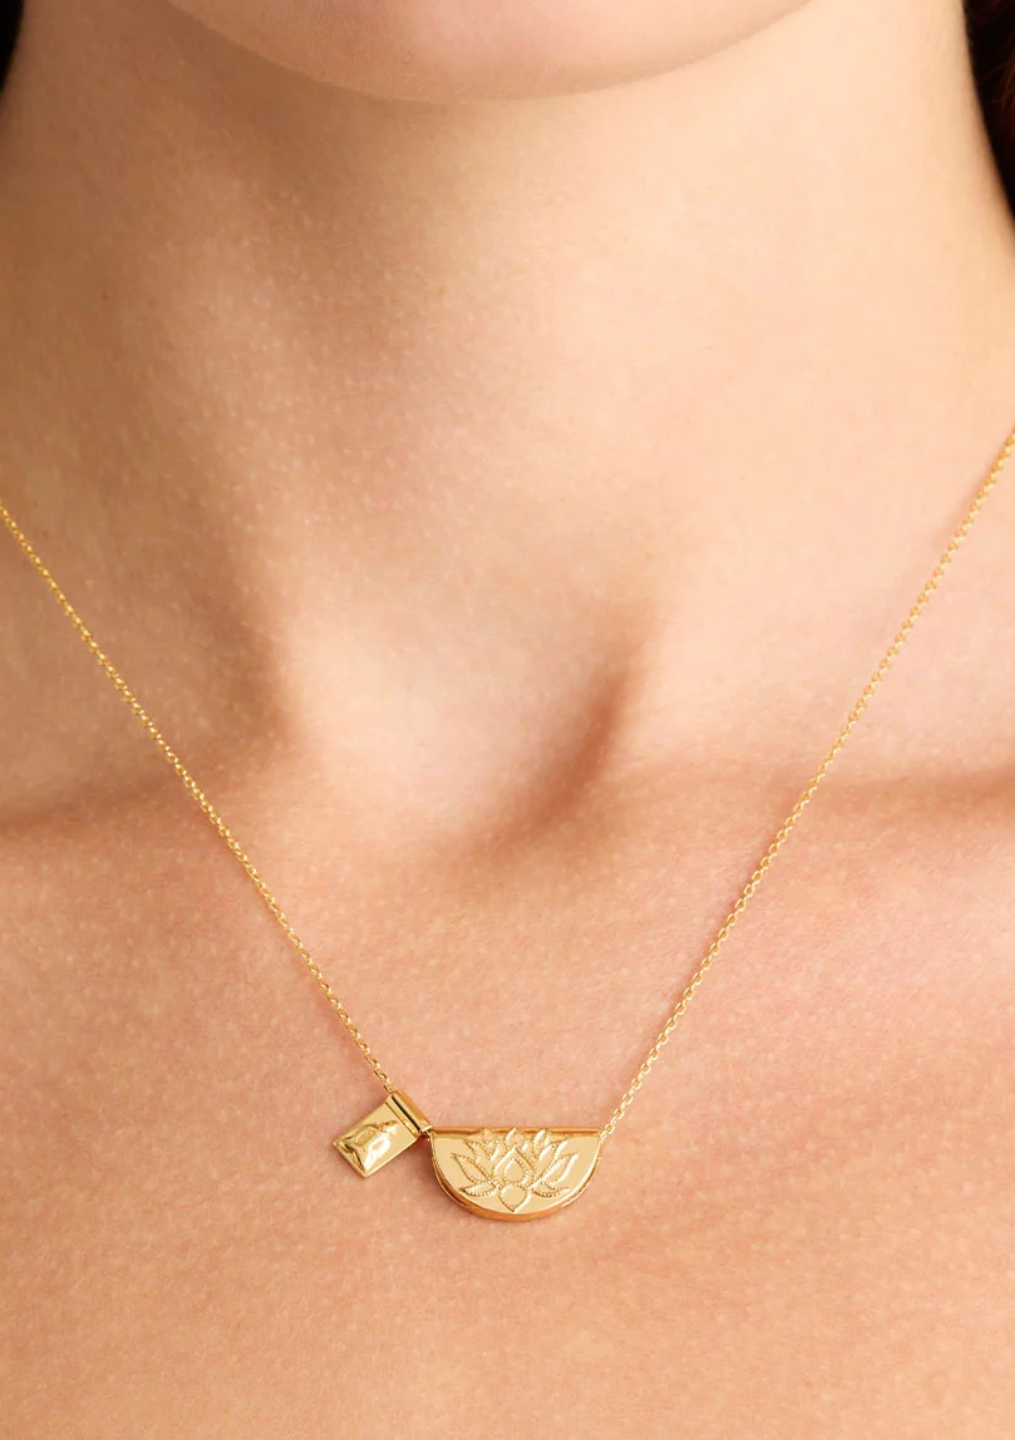 Lotus Flower Necklace Gold / Silver – Shany Design Studio